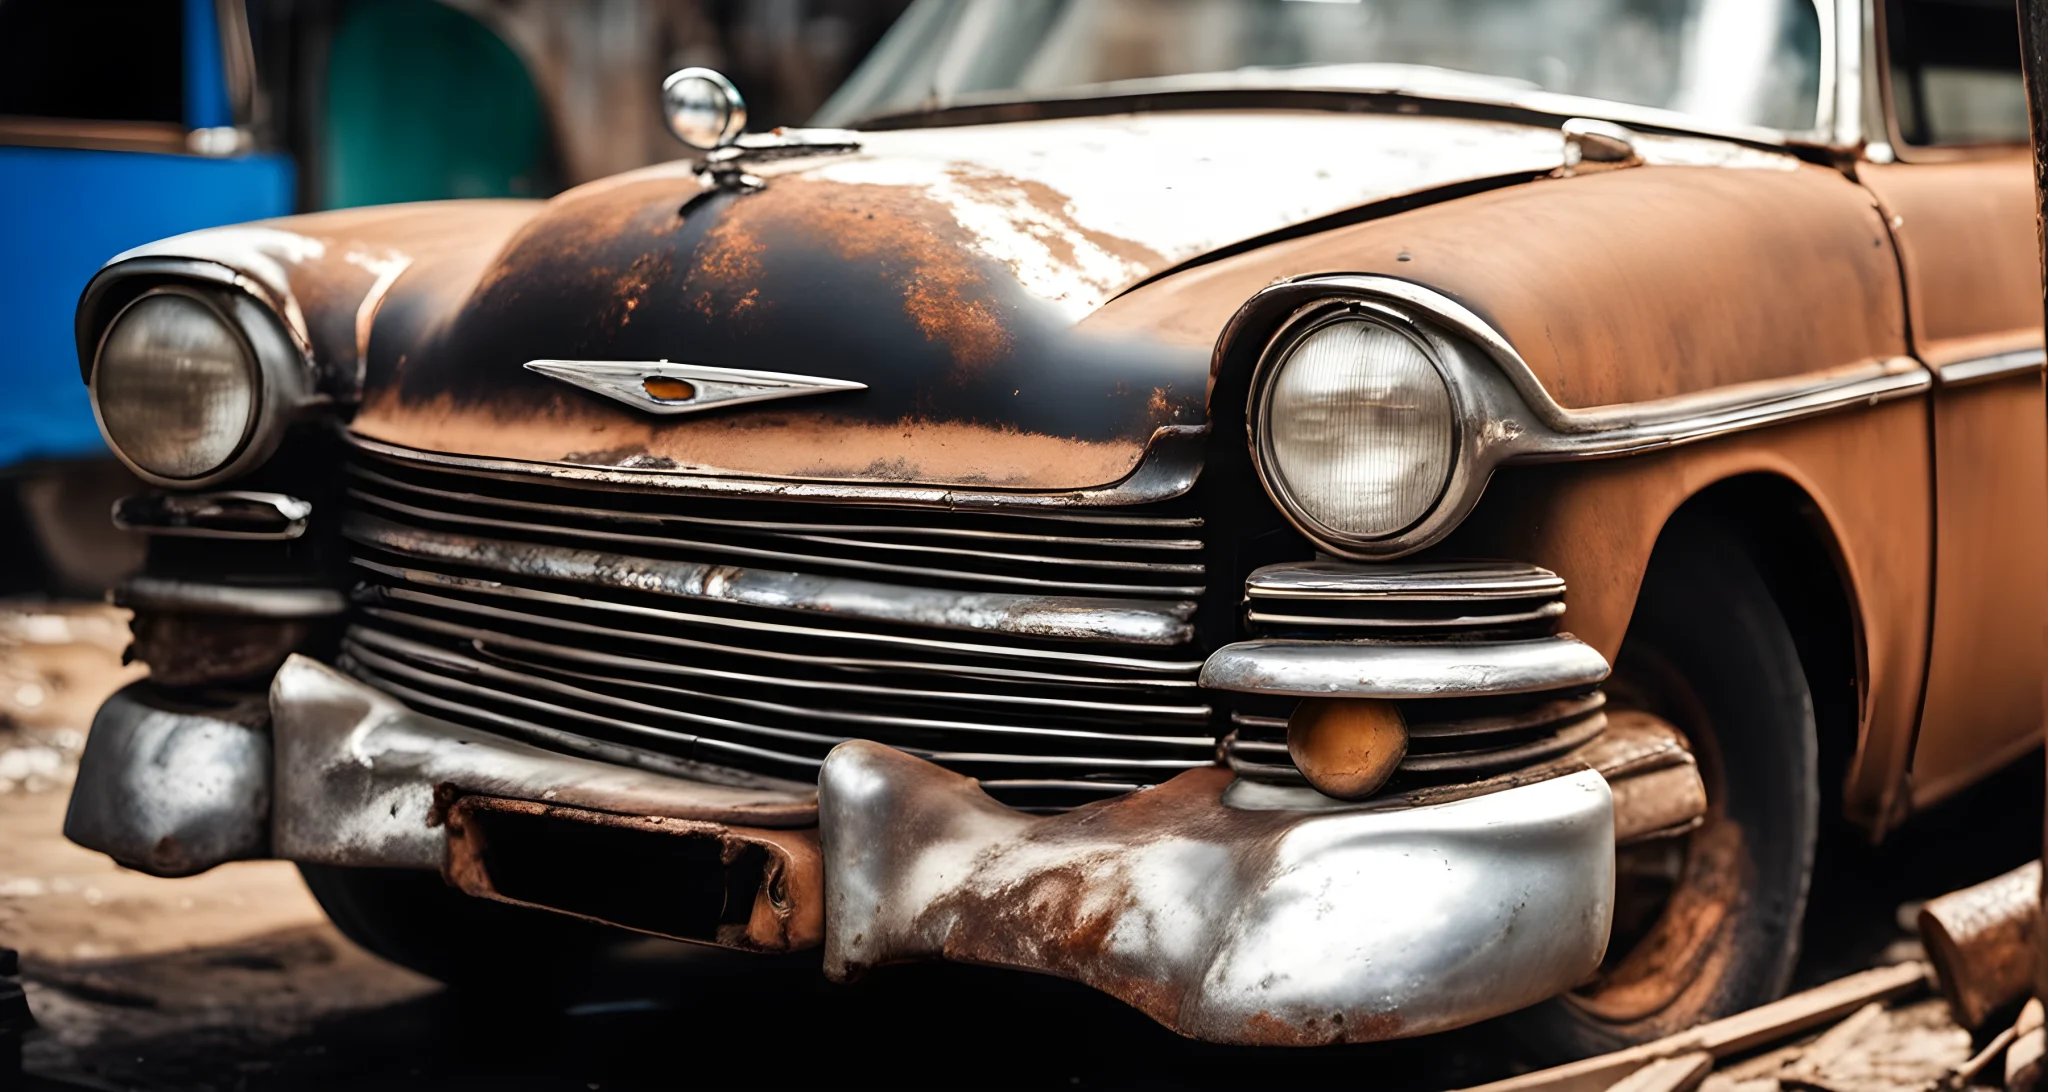 The image shows a vintage classic car in need of restoration, with visible rust and wear on the body and components.